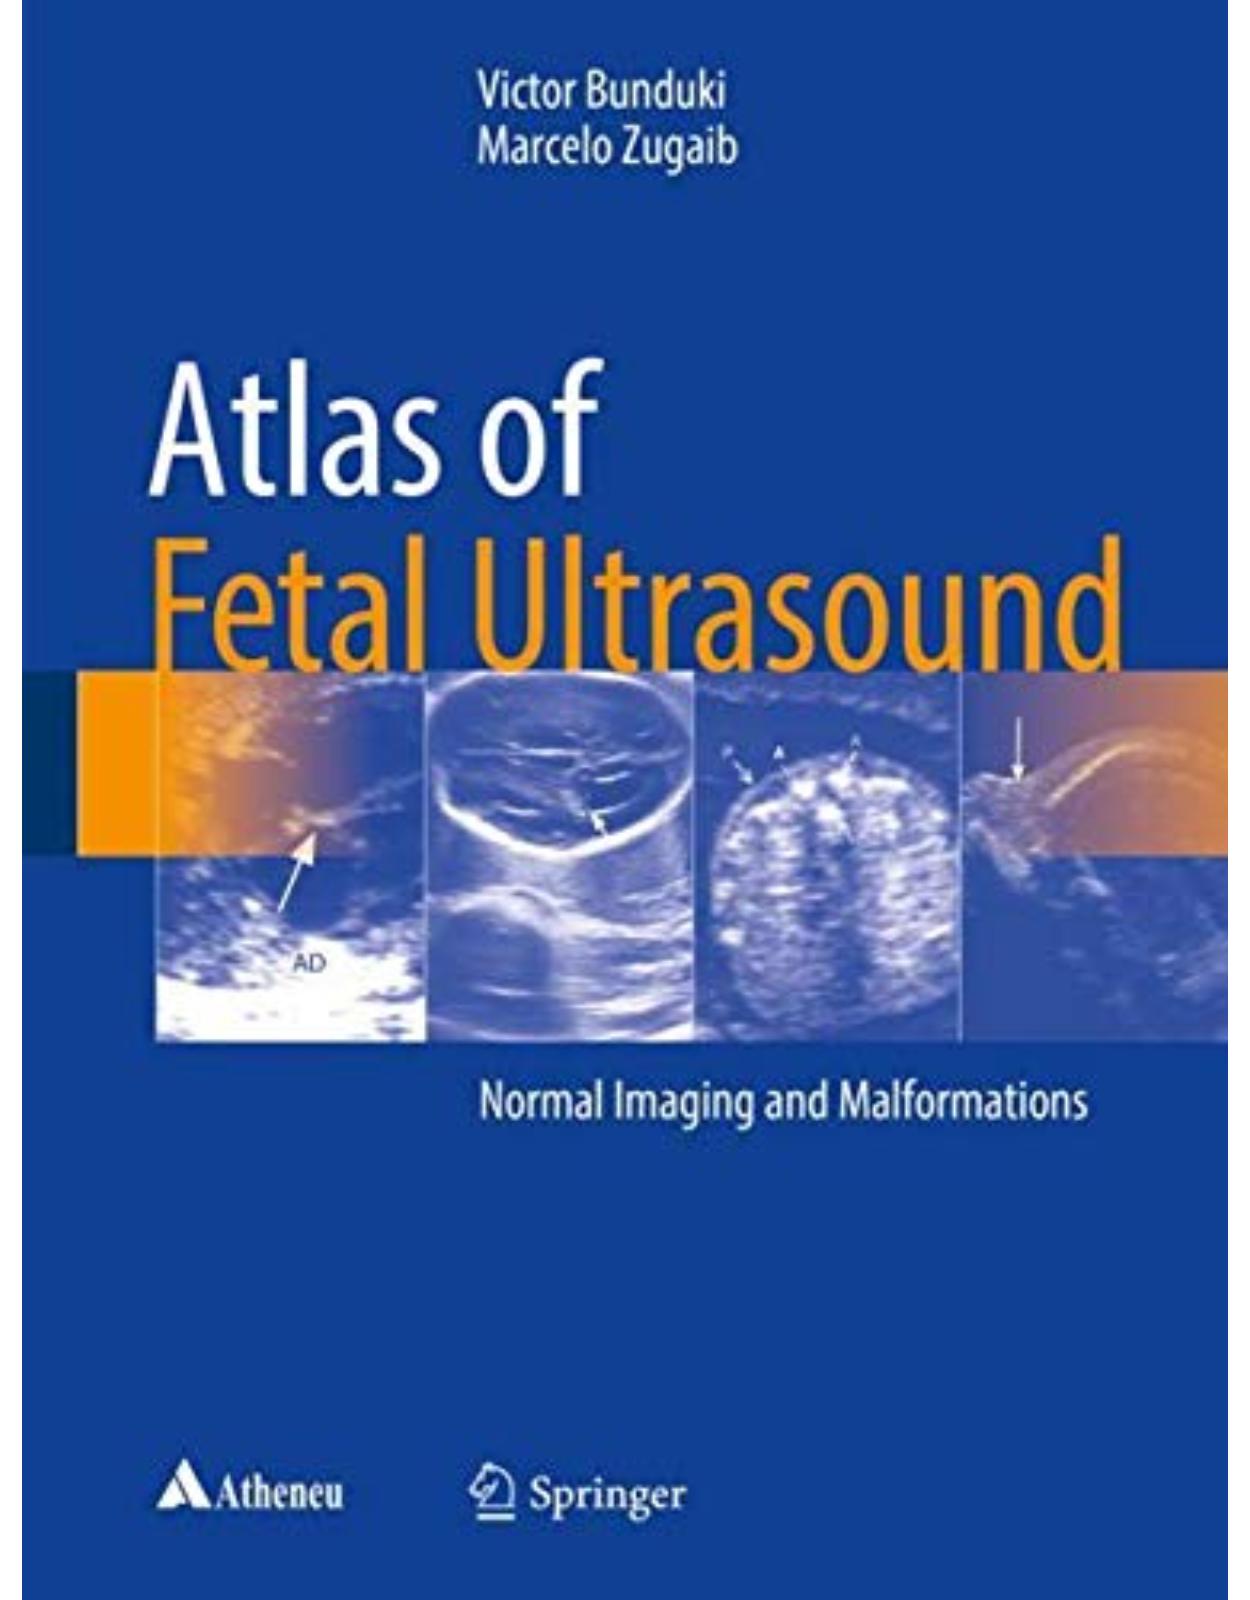 Atlas of Fetal Ultrasound Normal Imaging and Malformations